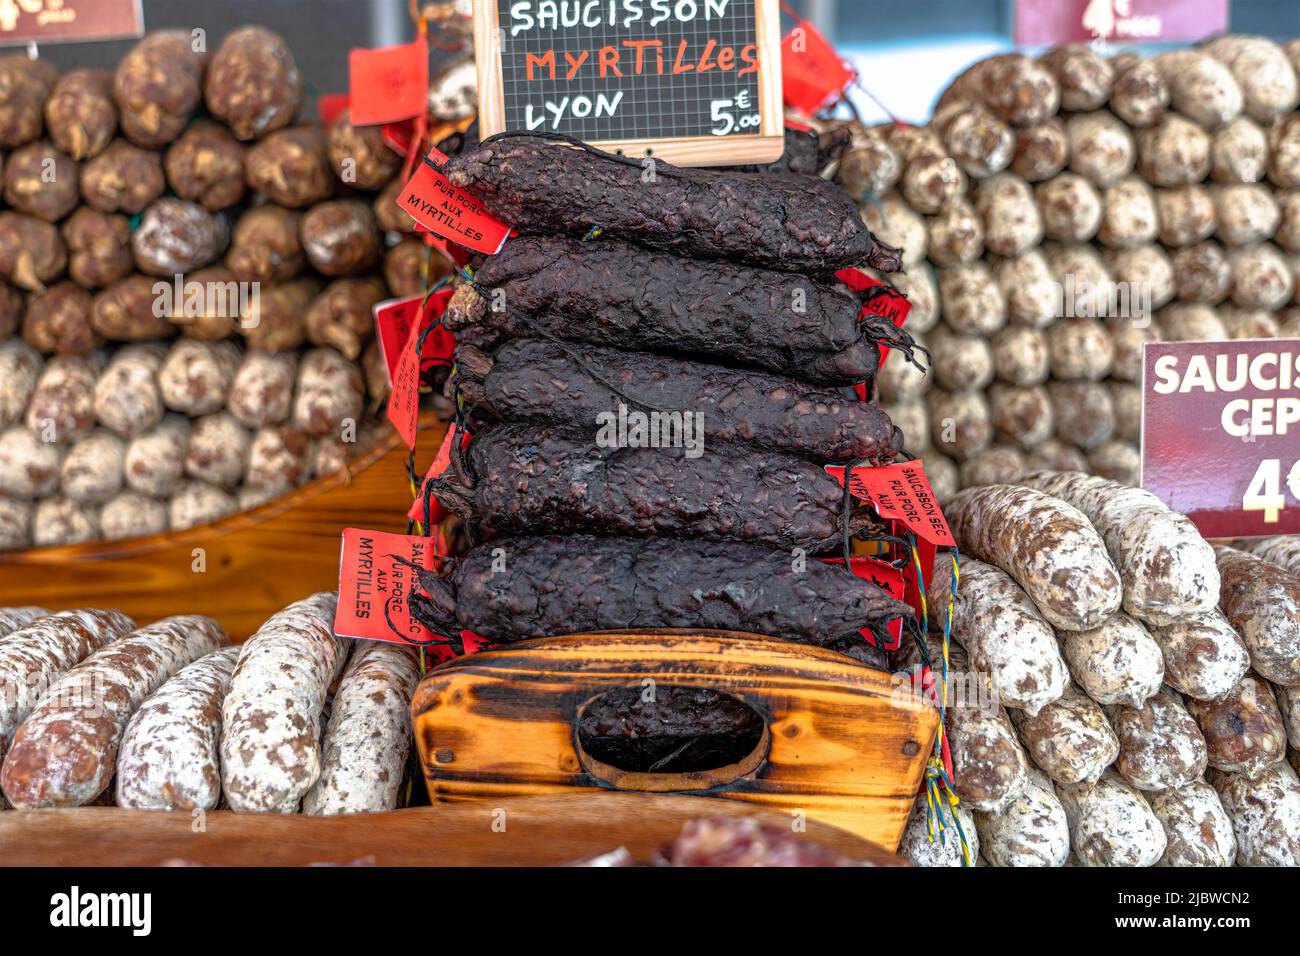 Stacks of dry-cured sausages - saucisson, typically made of pork, or a mixture of pork and other meats. Stock Photo